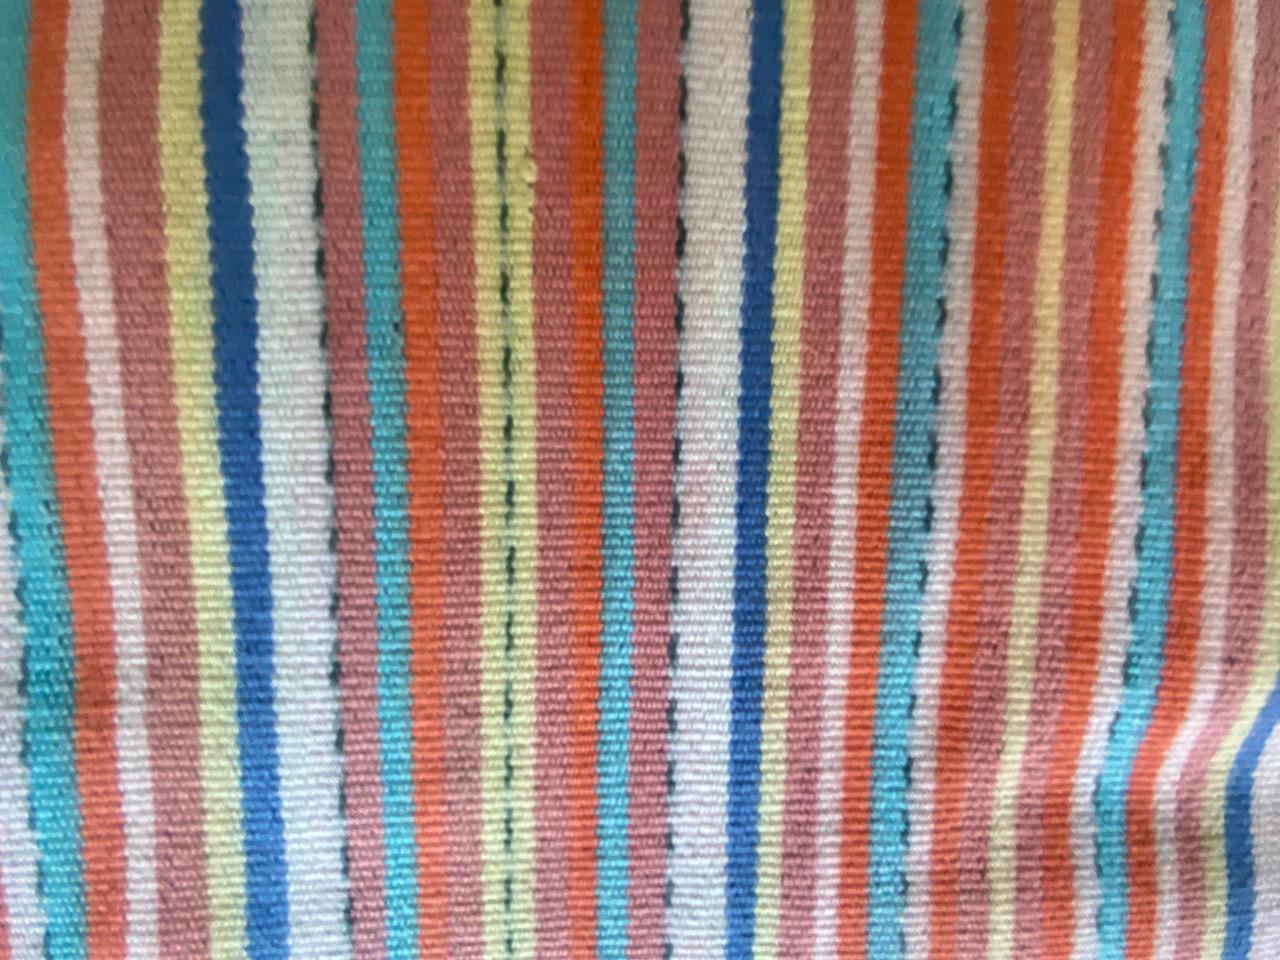 Stunning colors in this hand-woven textile from the island of Sumba, eastern Indonesia. The stripes seem modern yet mixed with the traditional center panel work so well together. Ikat is an ancient technique which is used to add patterns to